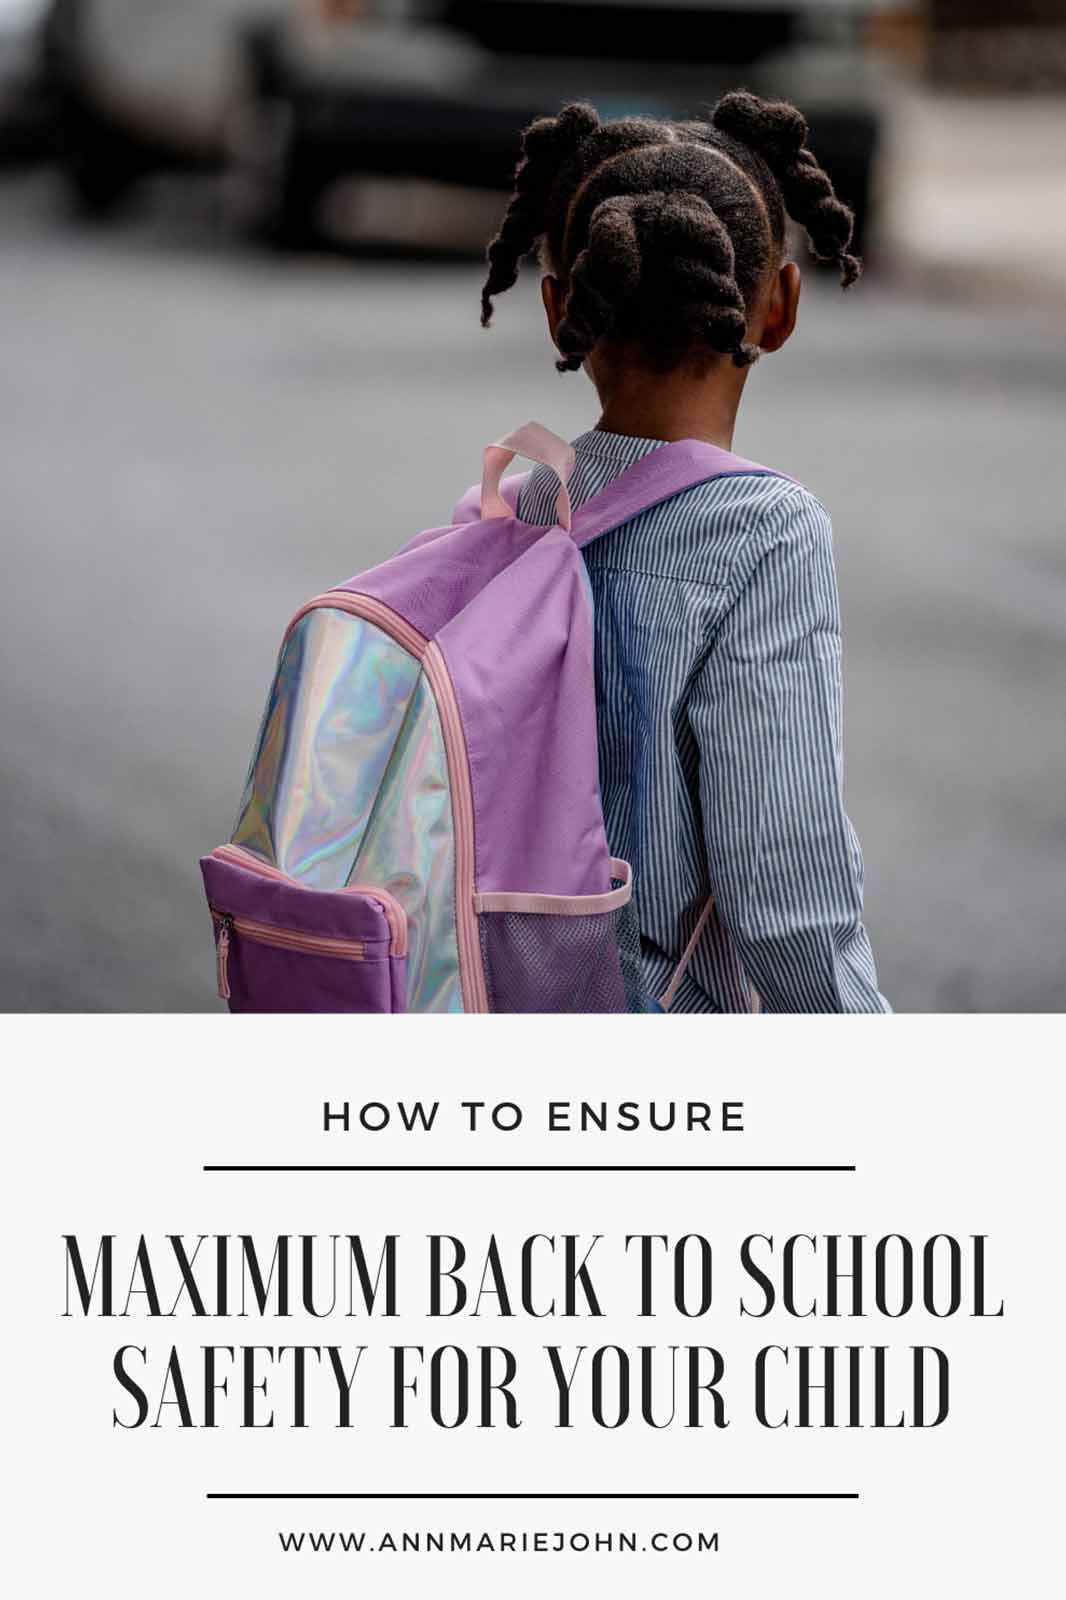 How to Ensure Maximum Back to School Safety for your Child